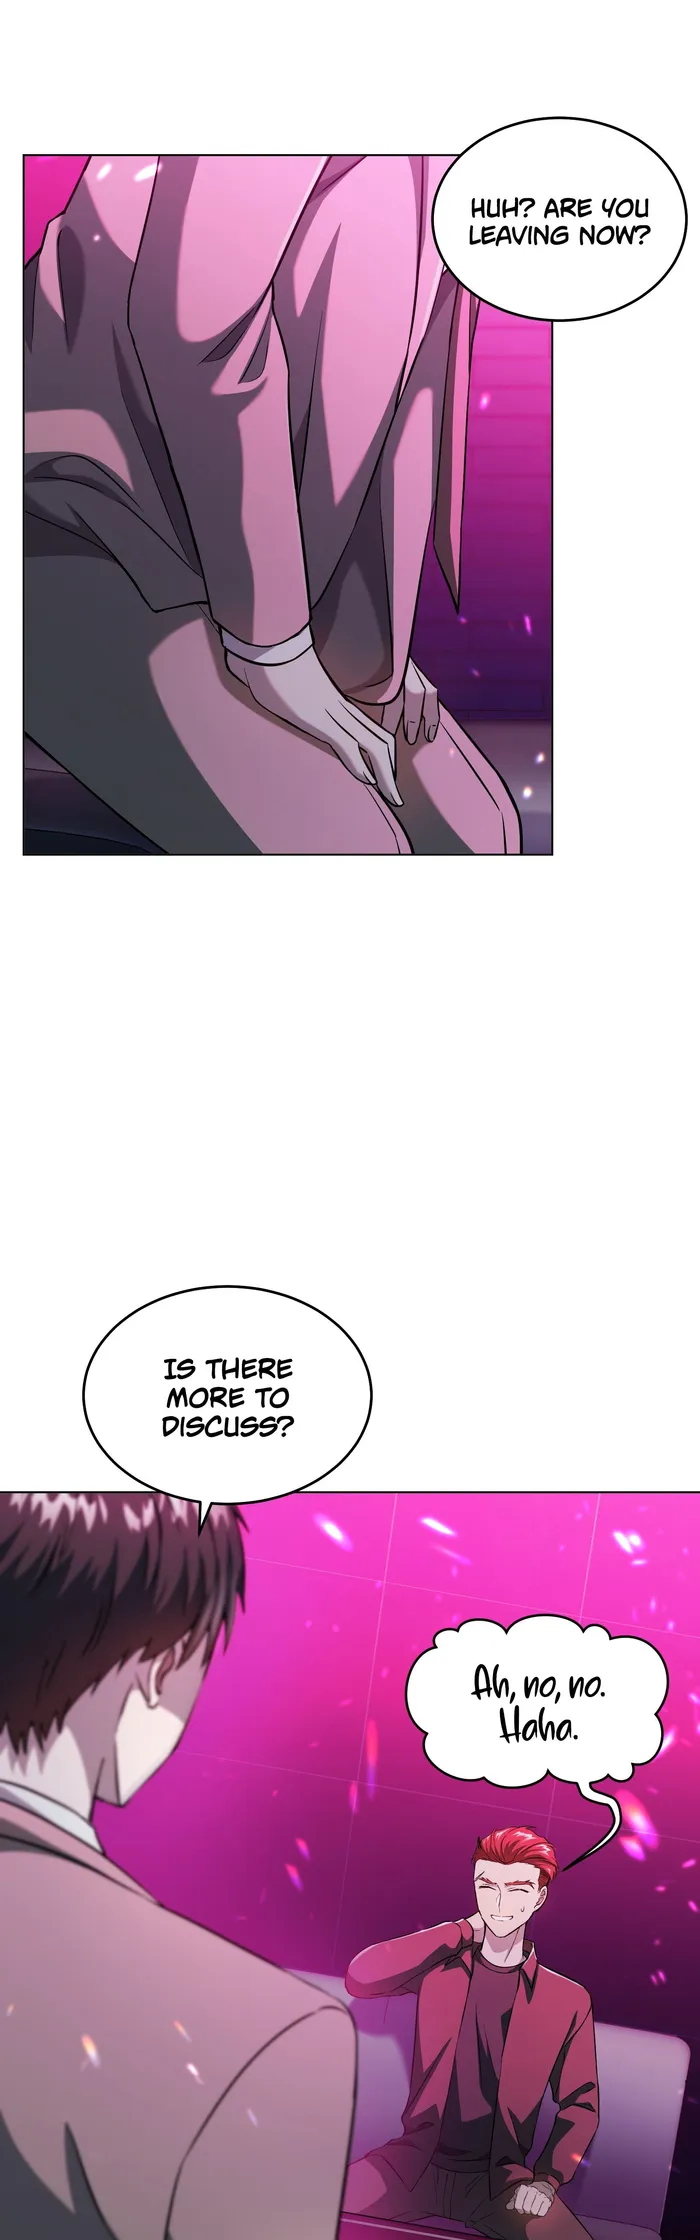 The Iron-Blooded Necromancer Has Returned - Page 2